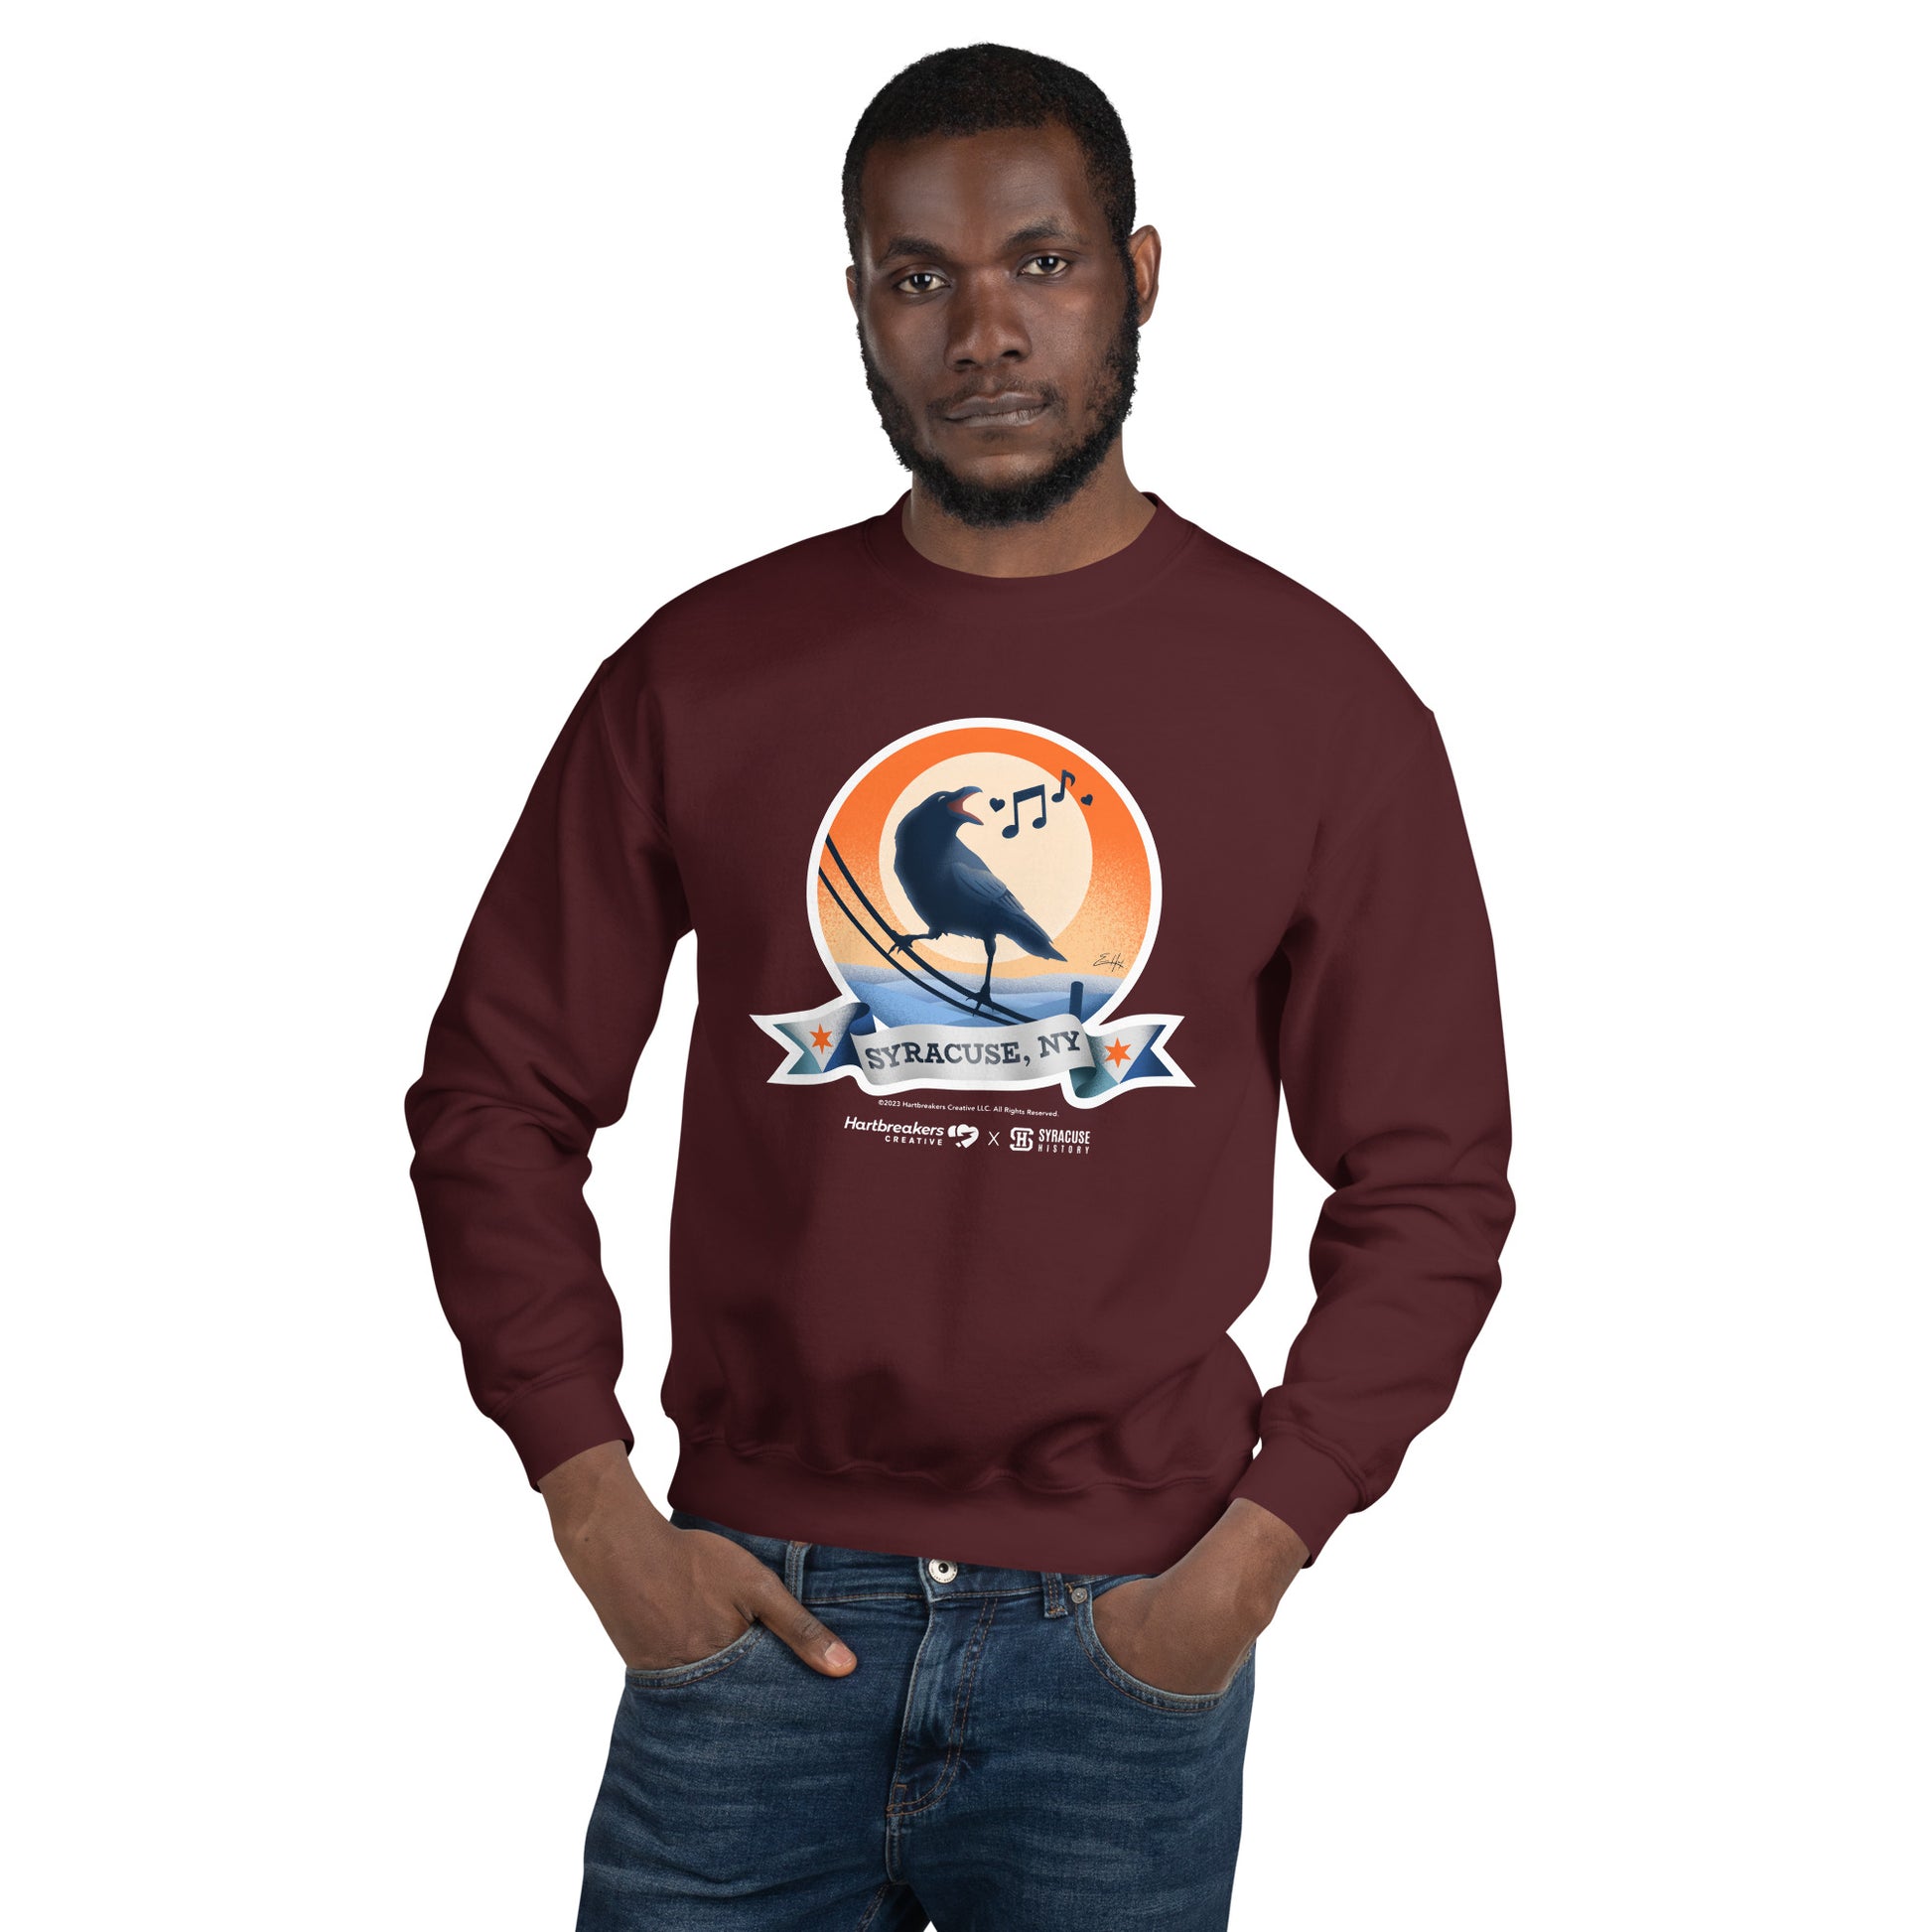 A man wearing a maroon sweatshirt featuring an illustration of a crow on a telephone wire and a banner beneath it that says Syracuse, NY